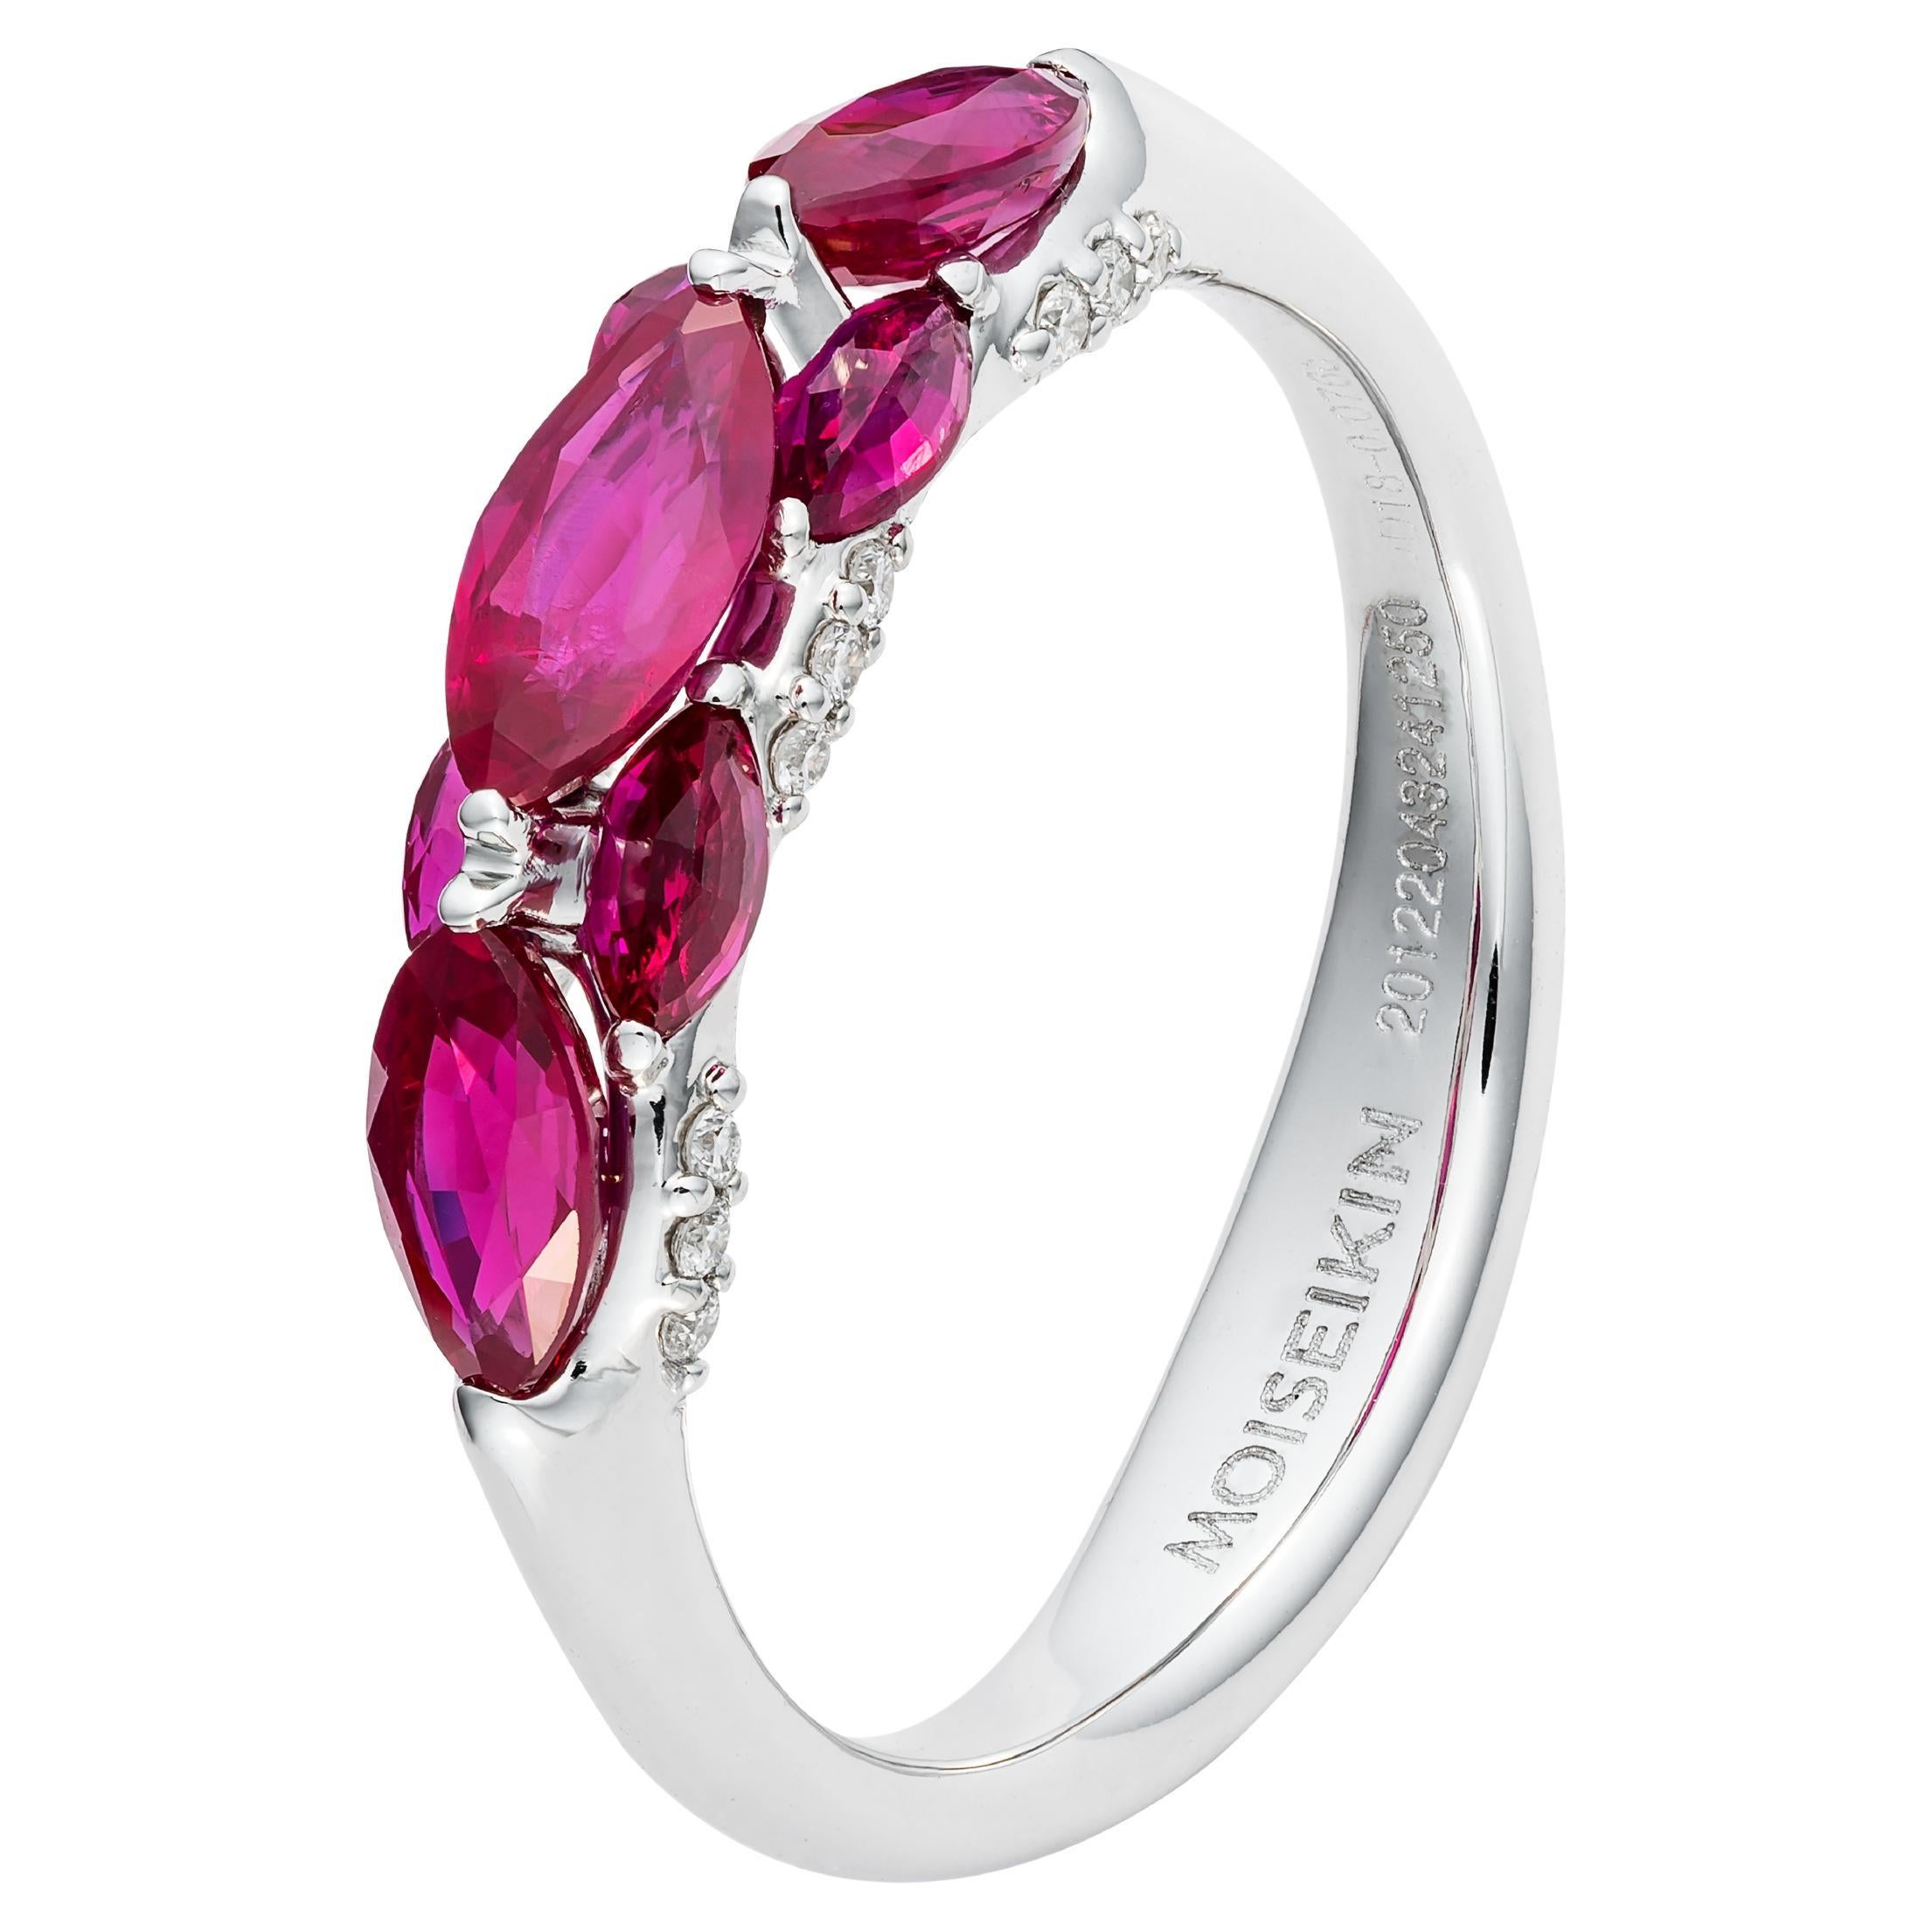 MOISEIKIN's Ruby and Diamond ring from the Harmony of Water collection signifies love and passion. The harmonious blend of saturated rubies, meticulously mounted in both traditional and unique reverse settings, radiates an intense energy that